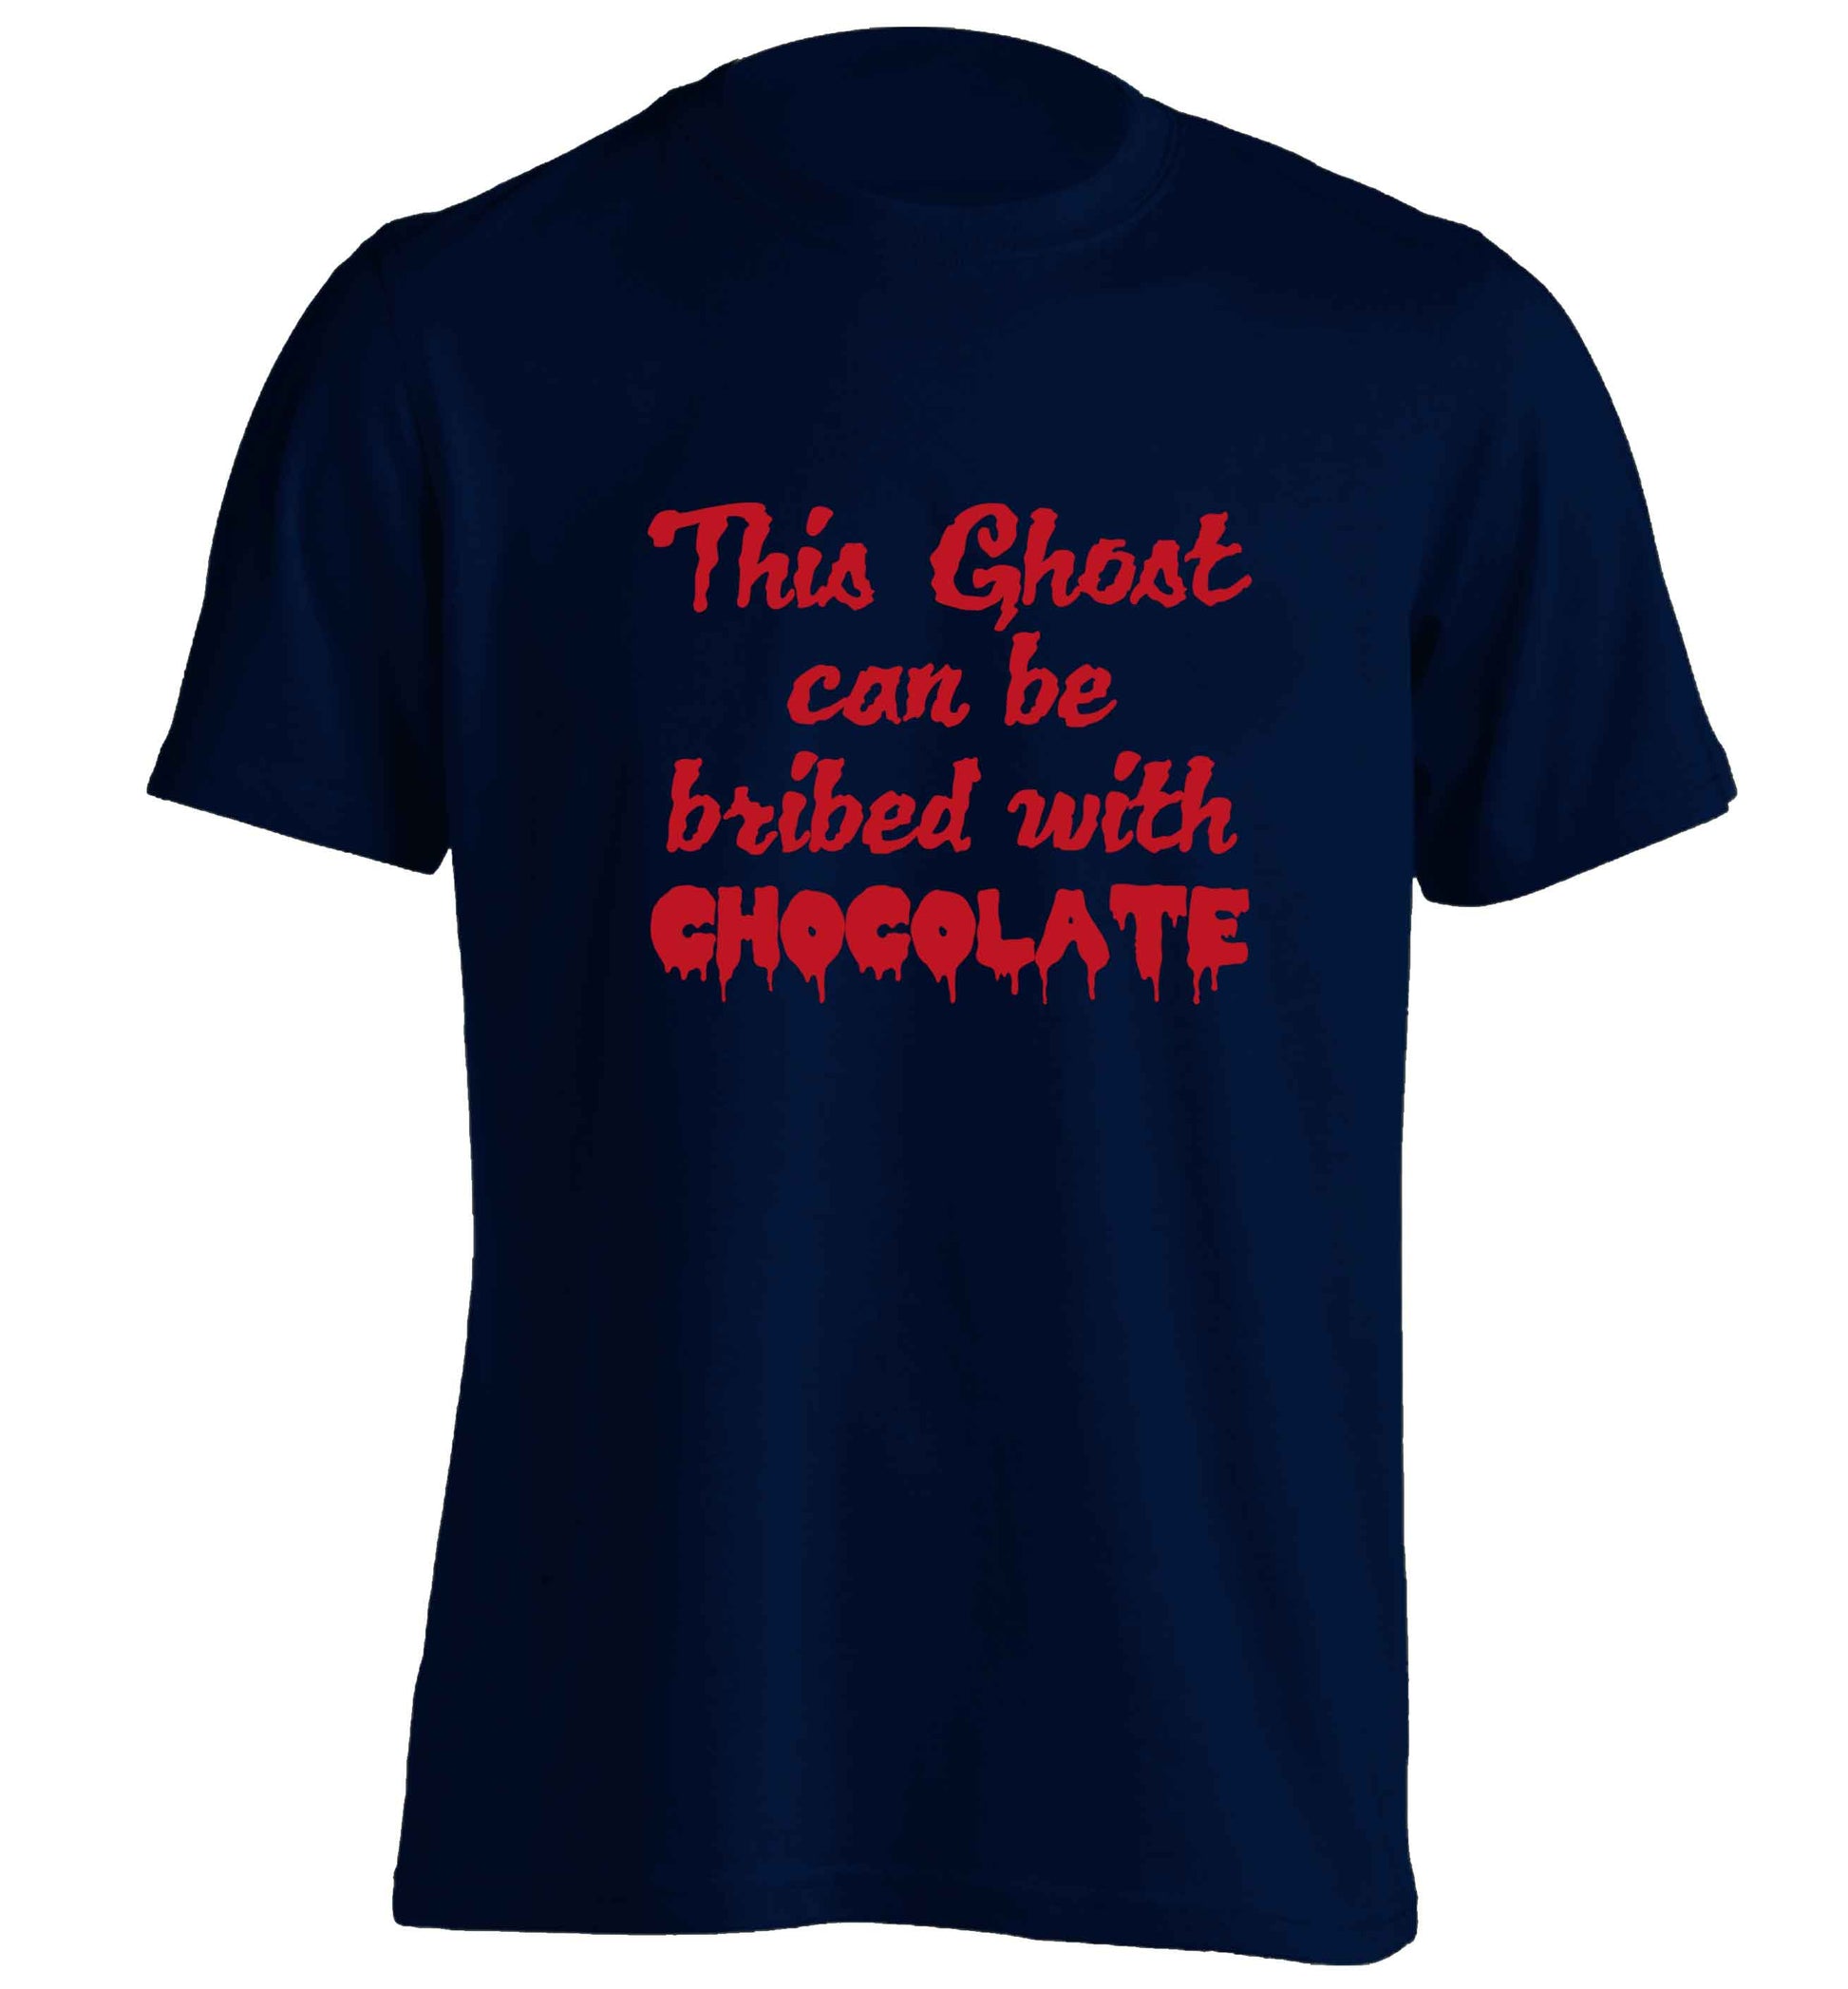 This ghost can be bribed with chocolate adults unisex navy Tshirt 2XL